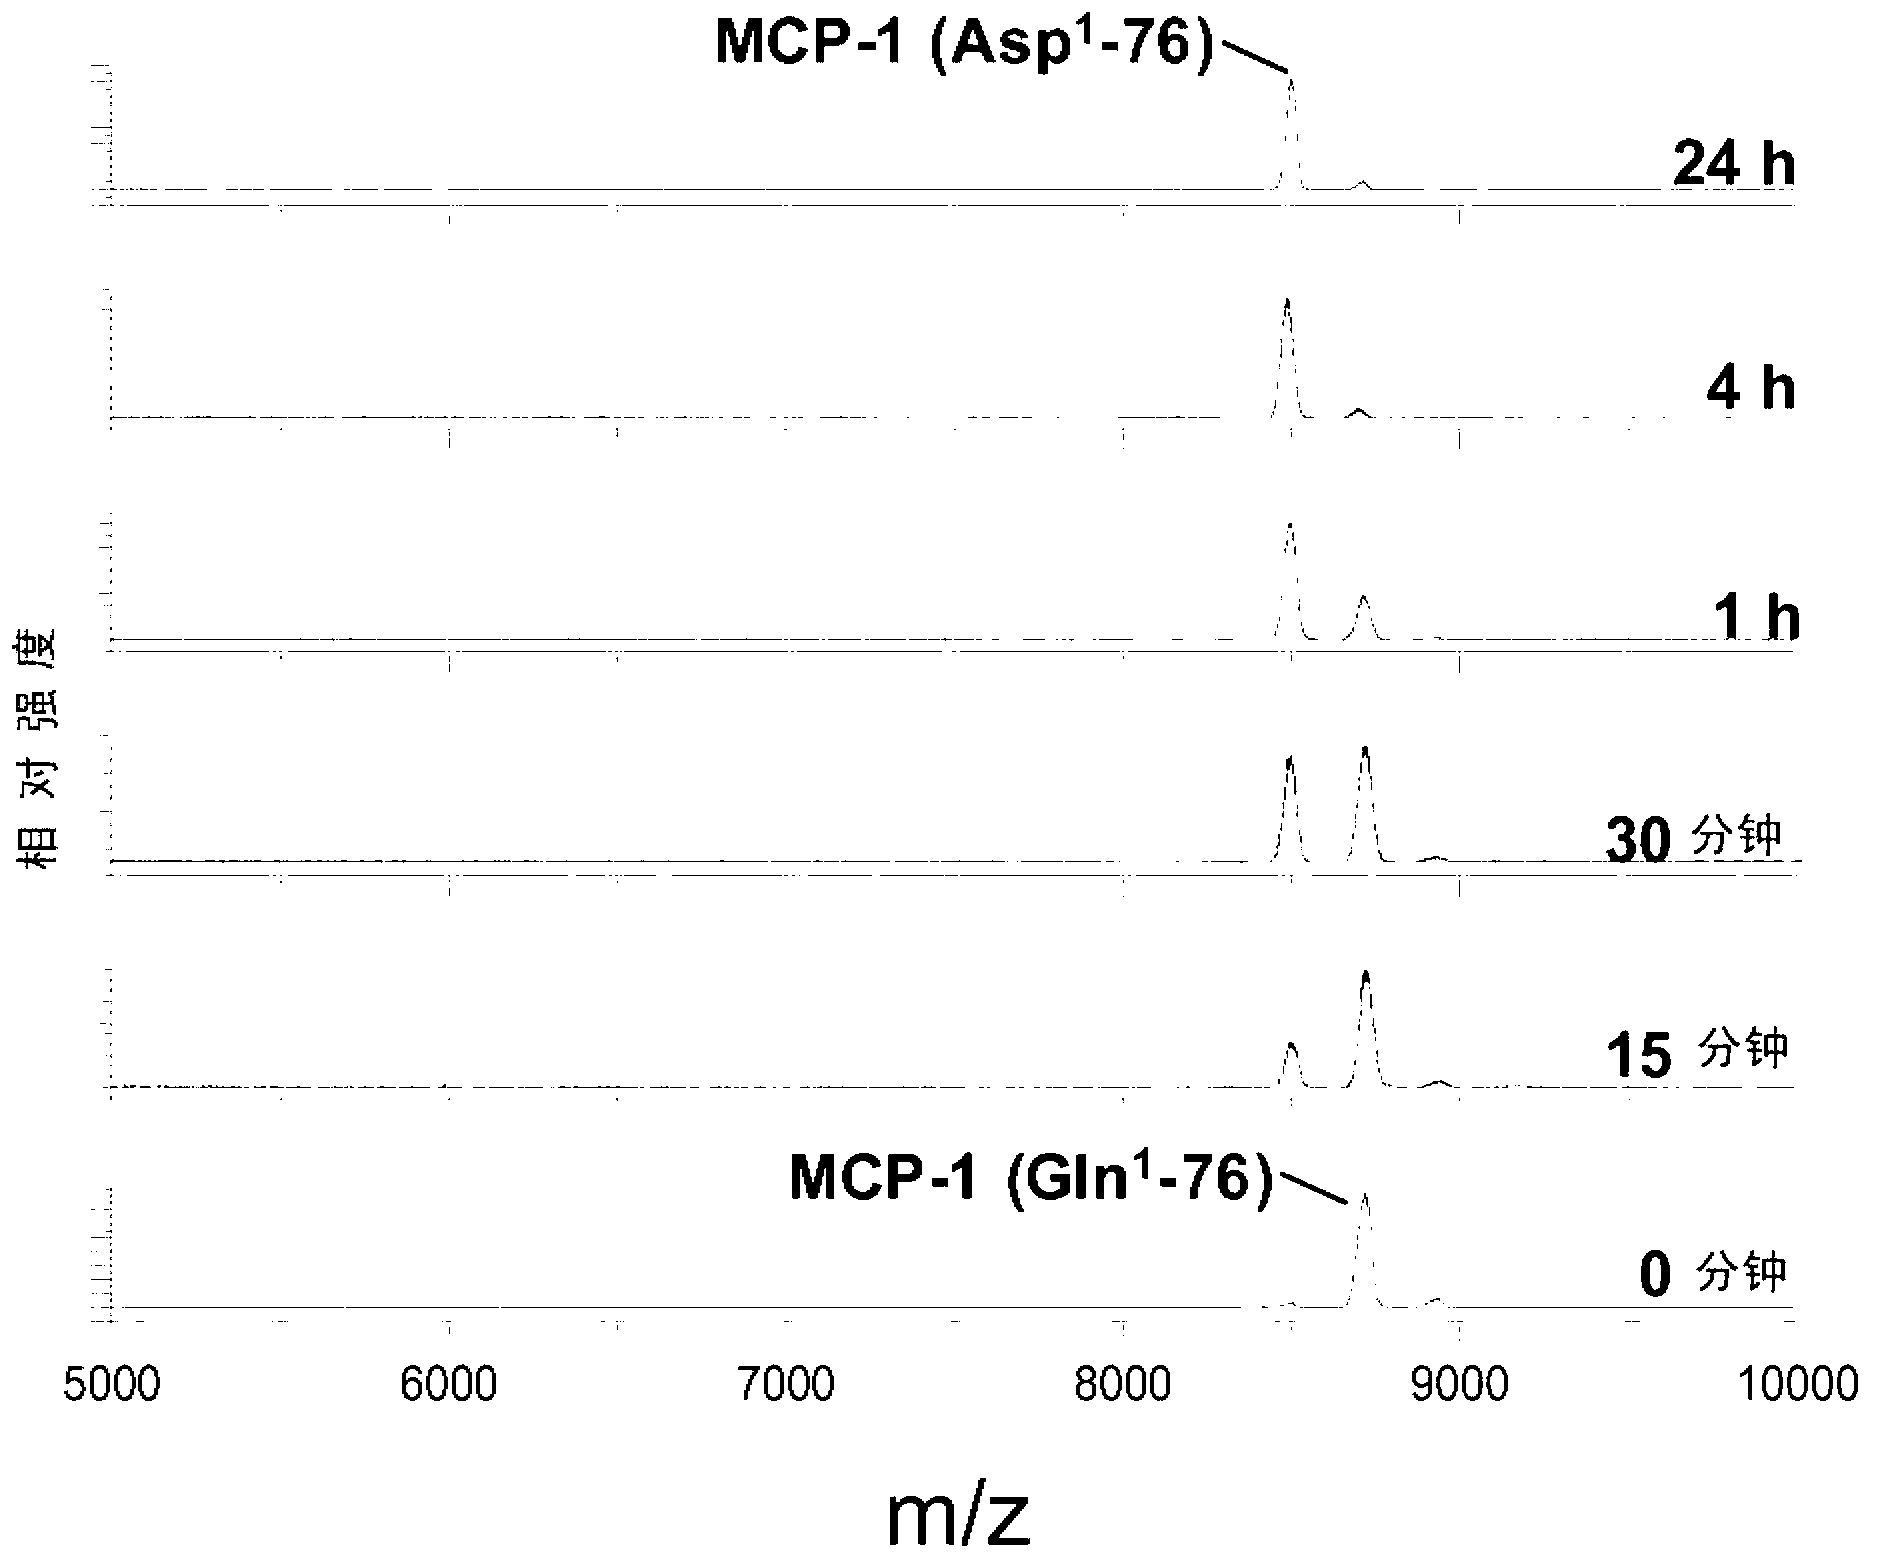 Methods of diagnosing inflammatory diseases by determining pyroglutamate-modified mcp-1 and screening methods for inhibitors of glutaminyl cyclase